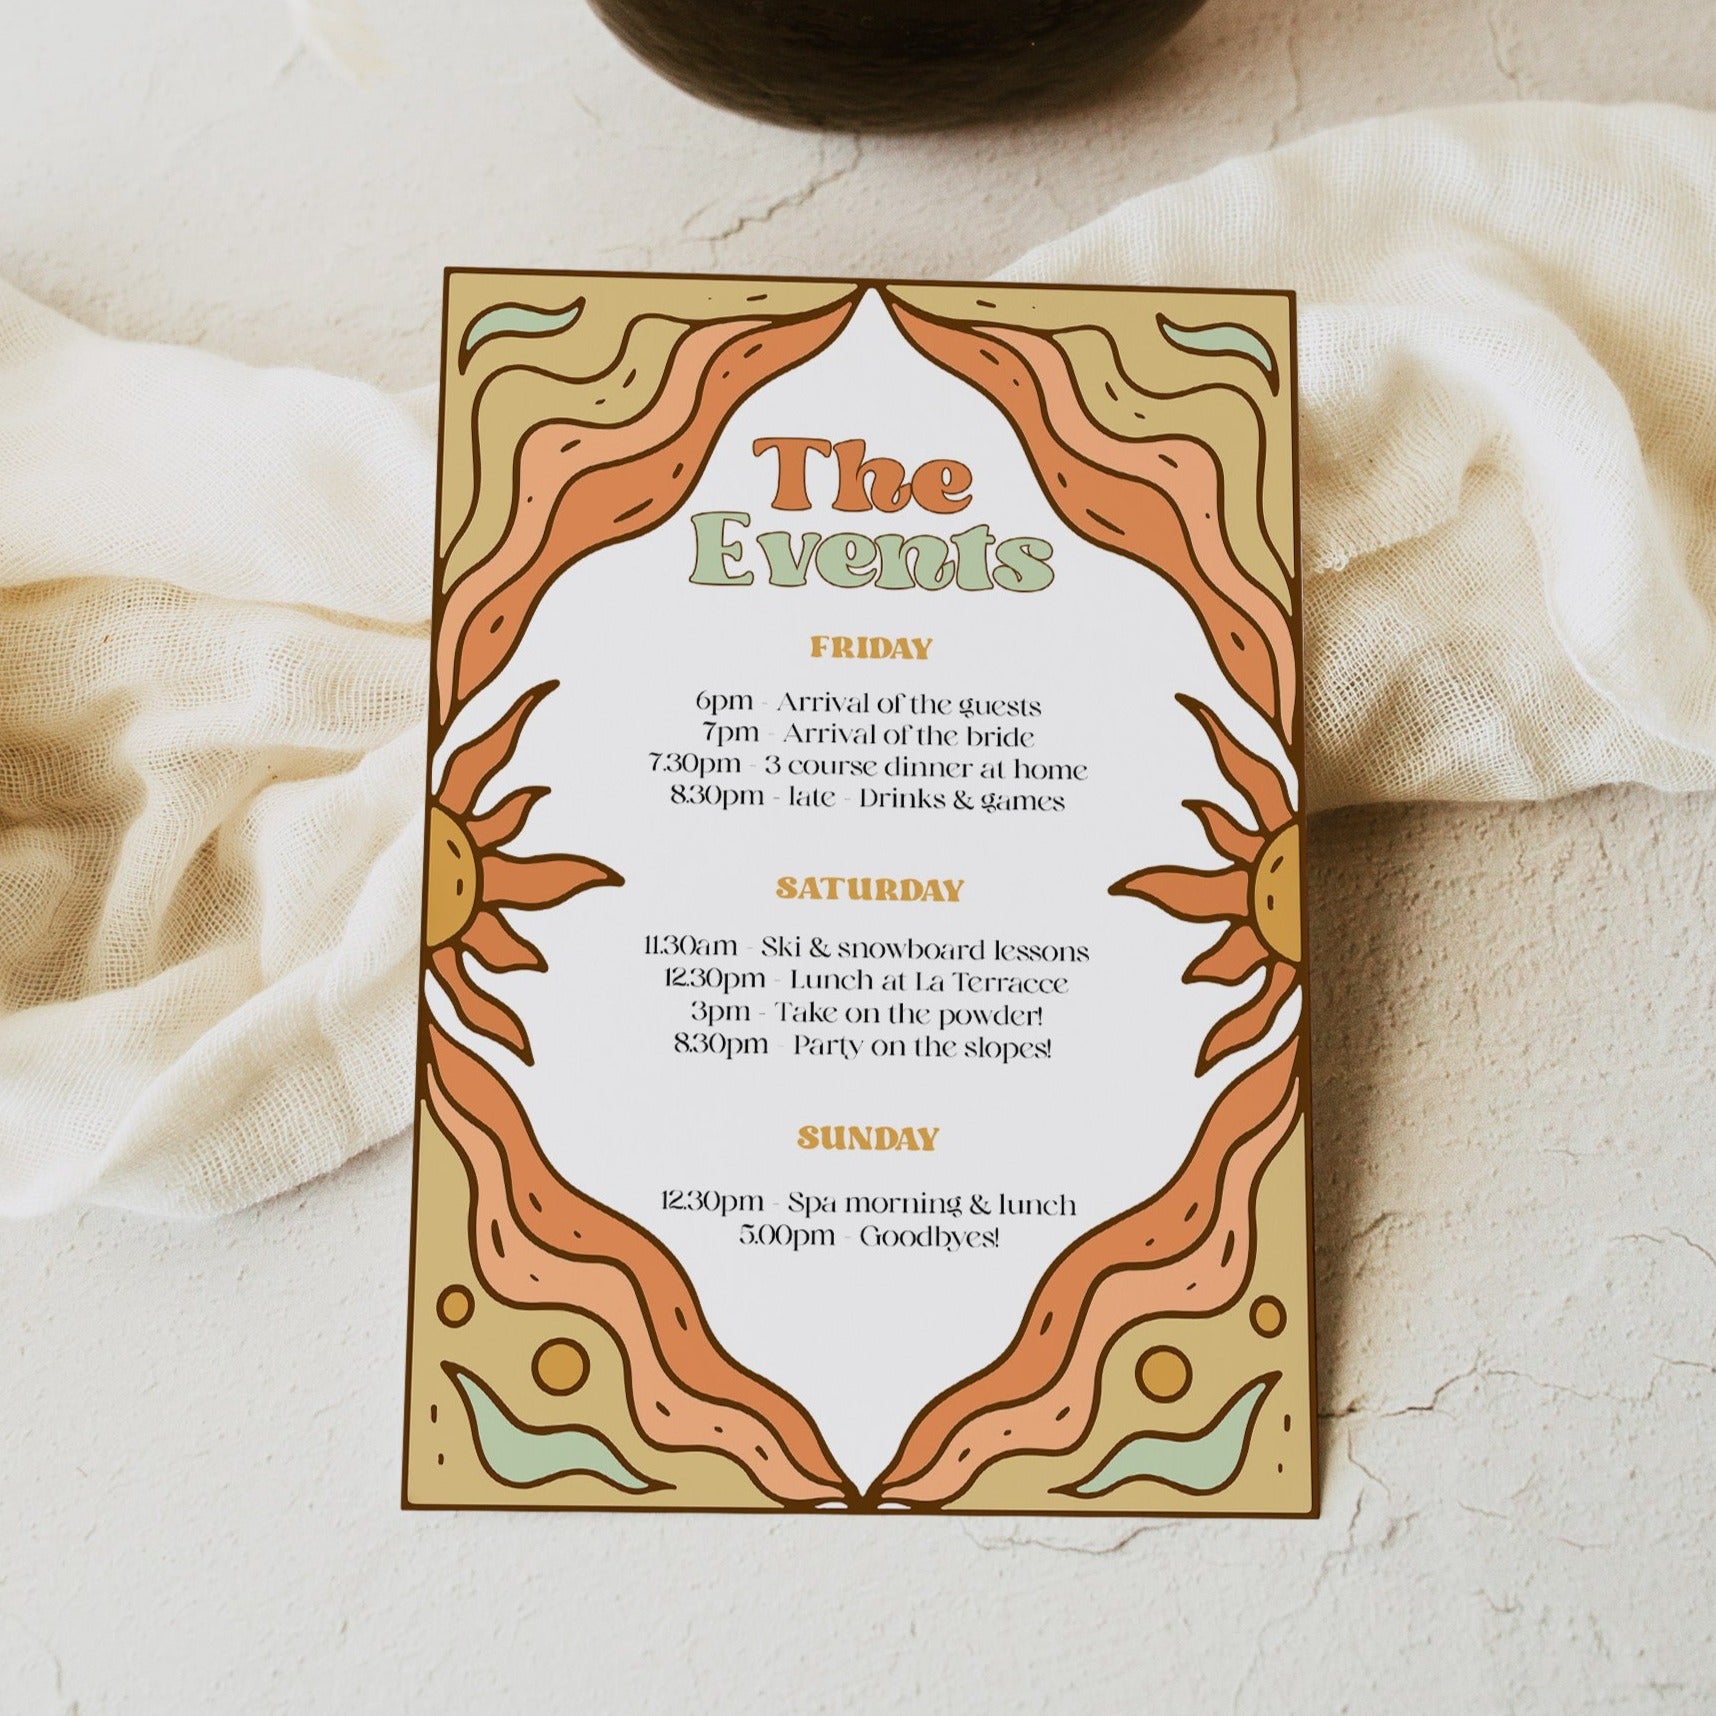 60s Gypsy Boho-inspired editable bachelorette weekend invitation is the perfect way to add a touch of free-spirited charm to your special day